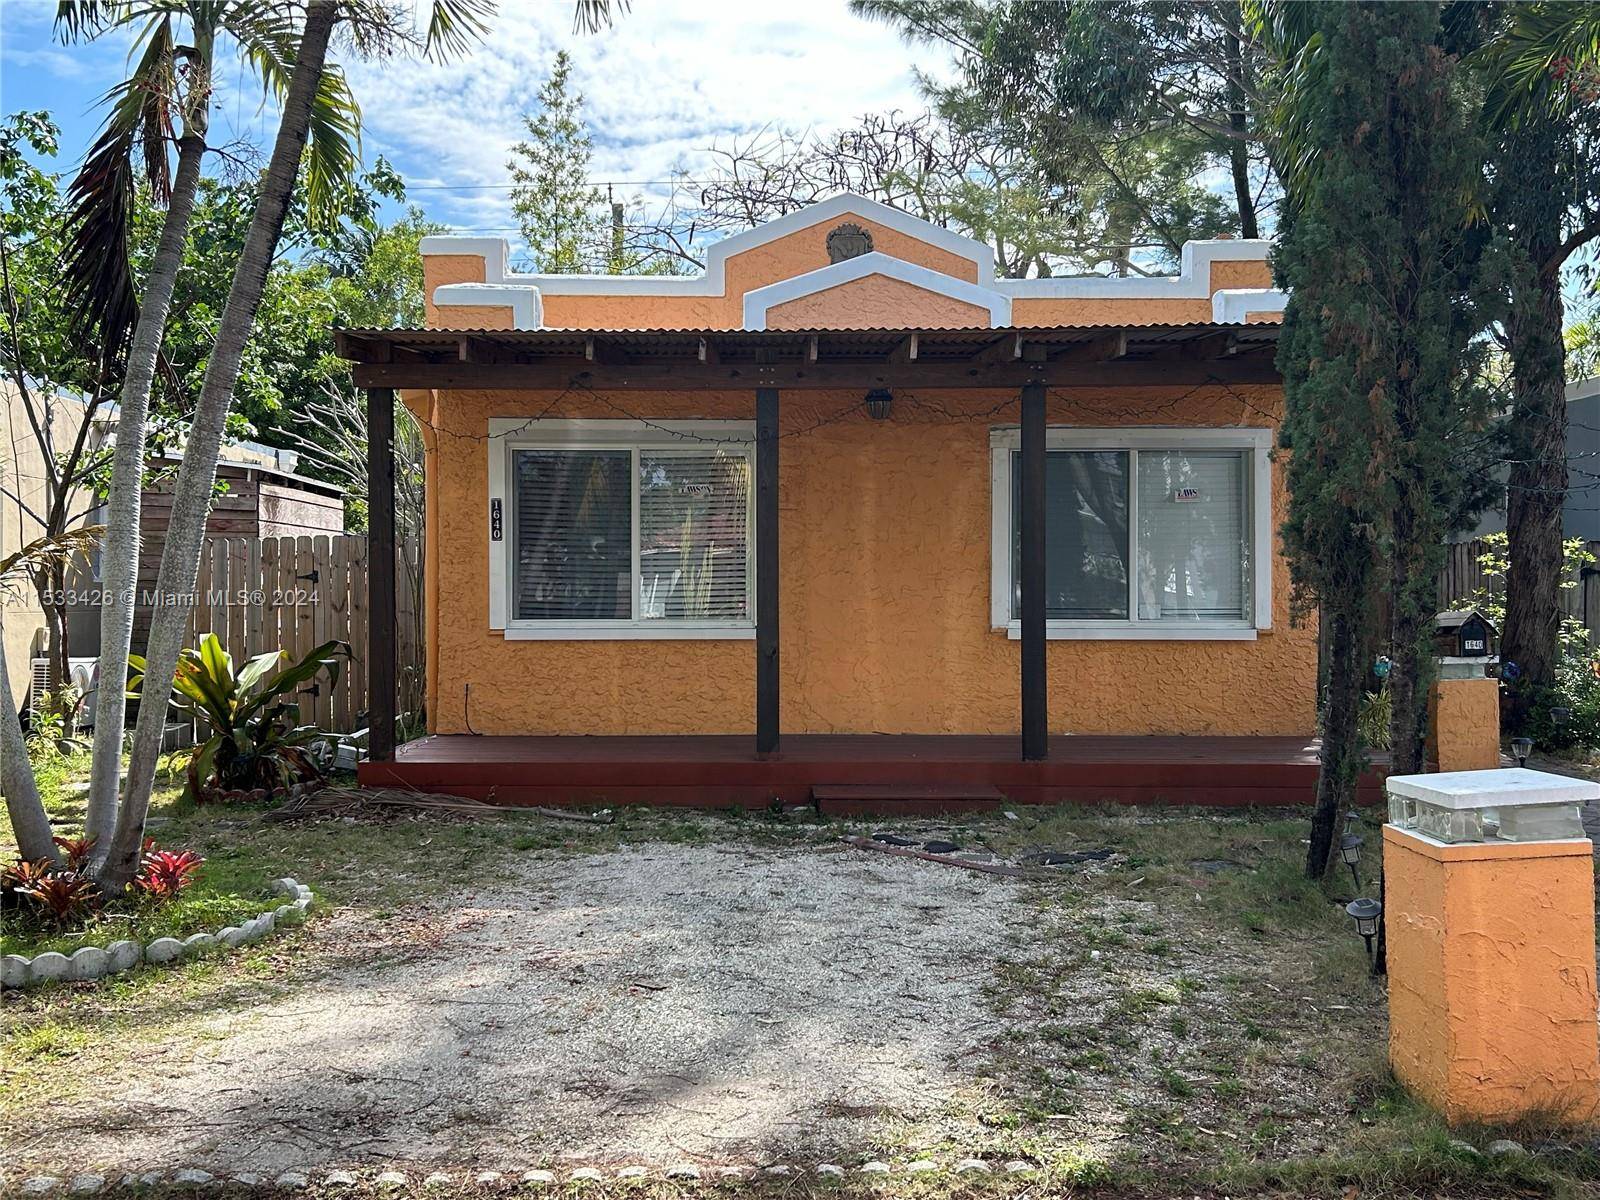 Available 2BR 1BA single family home with a backyard in East Hollywood.